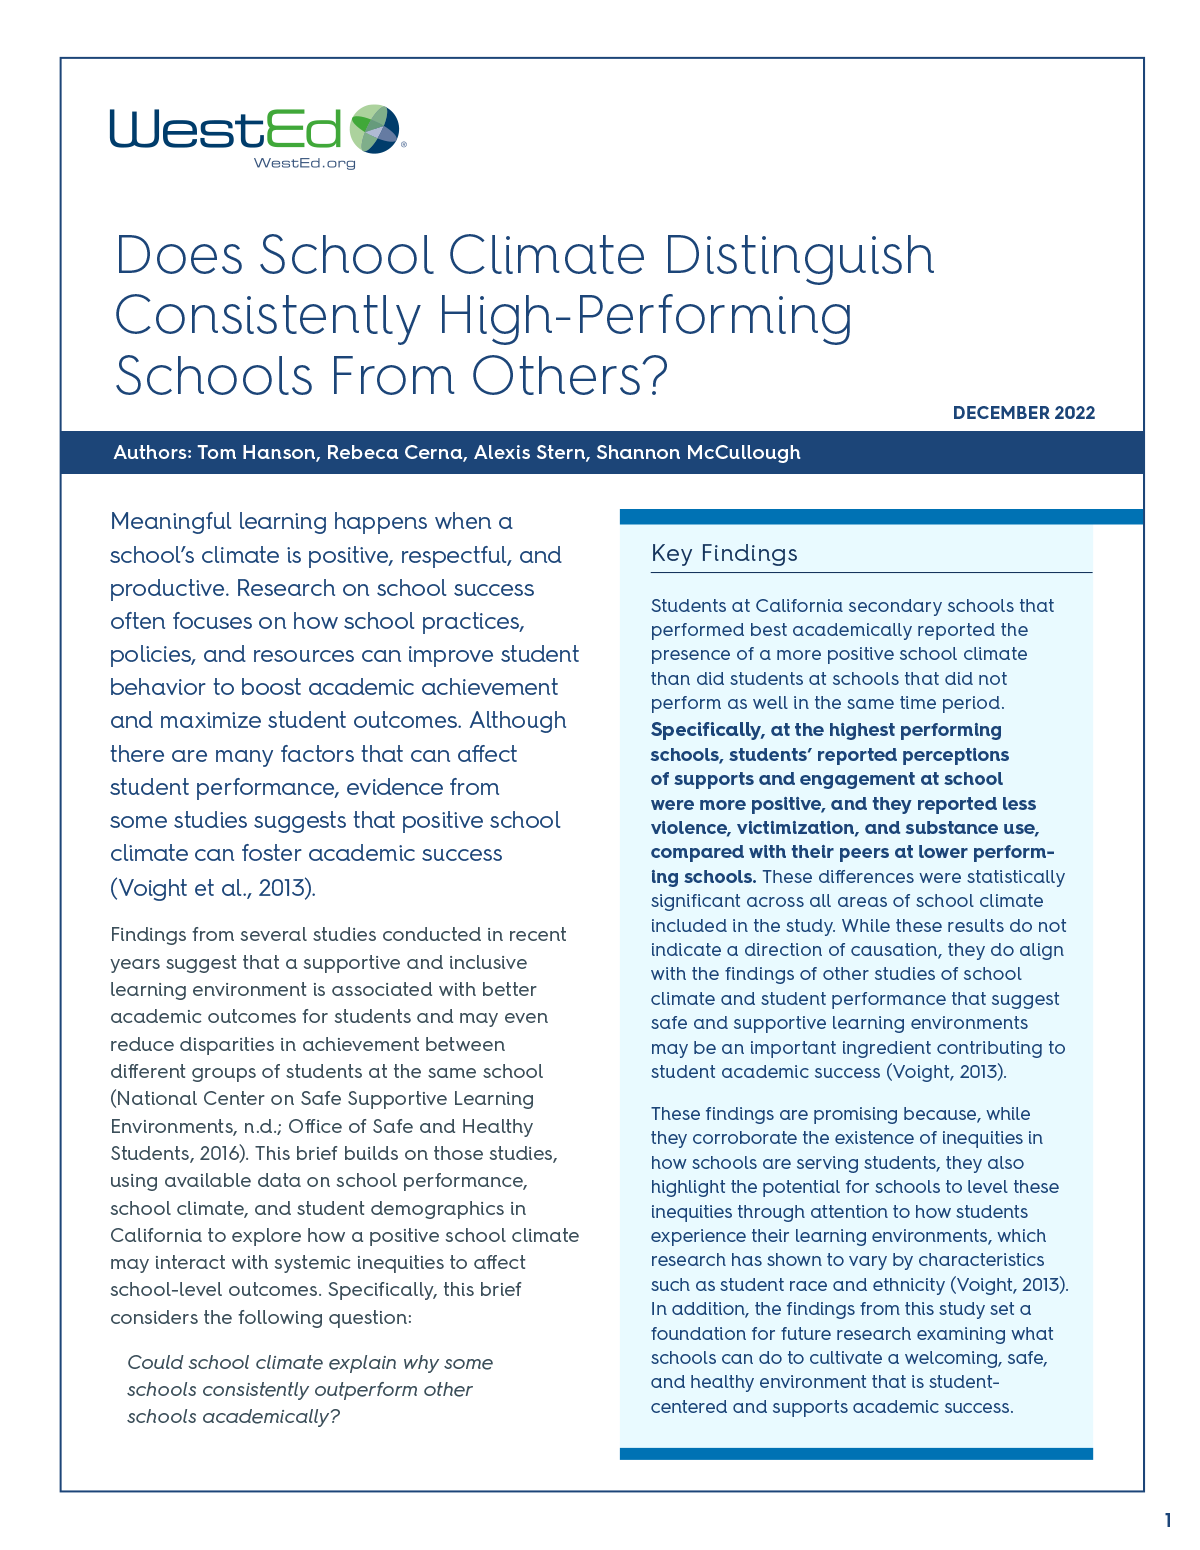 Does School Climate Distinguish Consistently High-Performing Schools From Others?